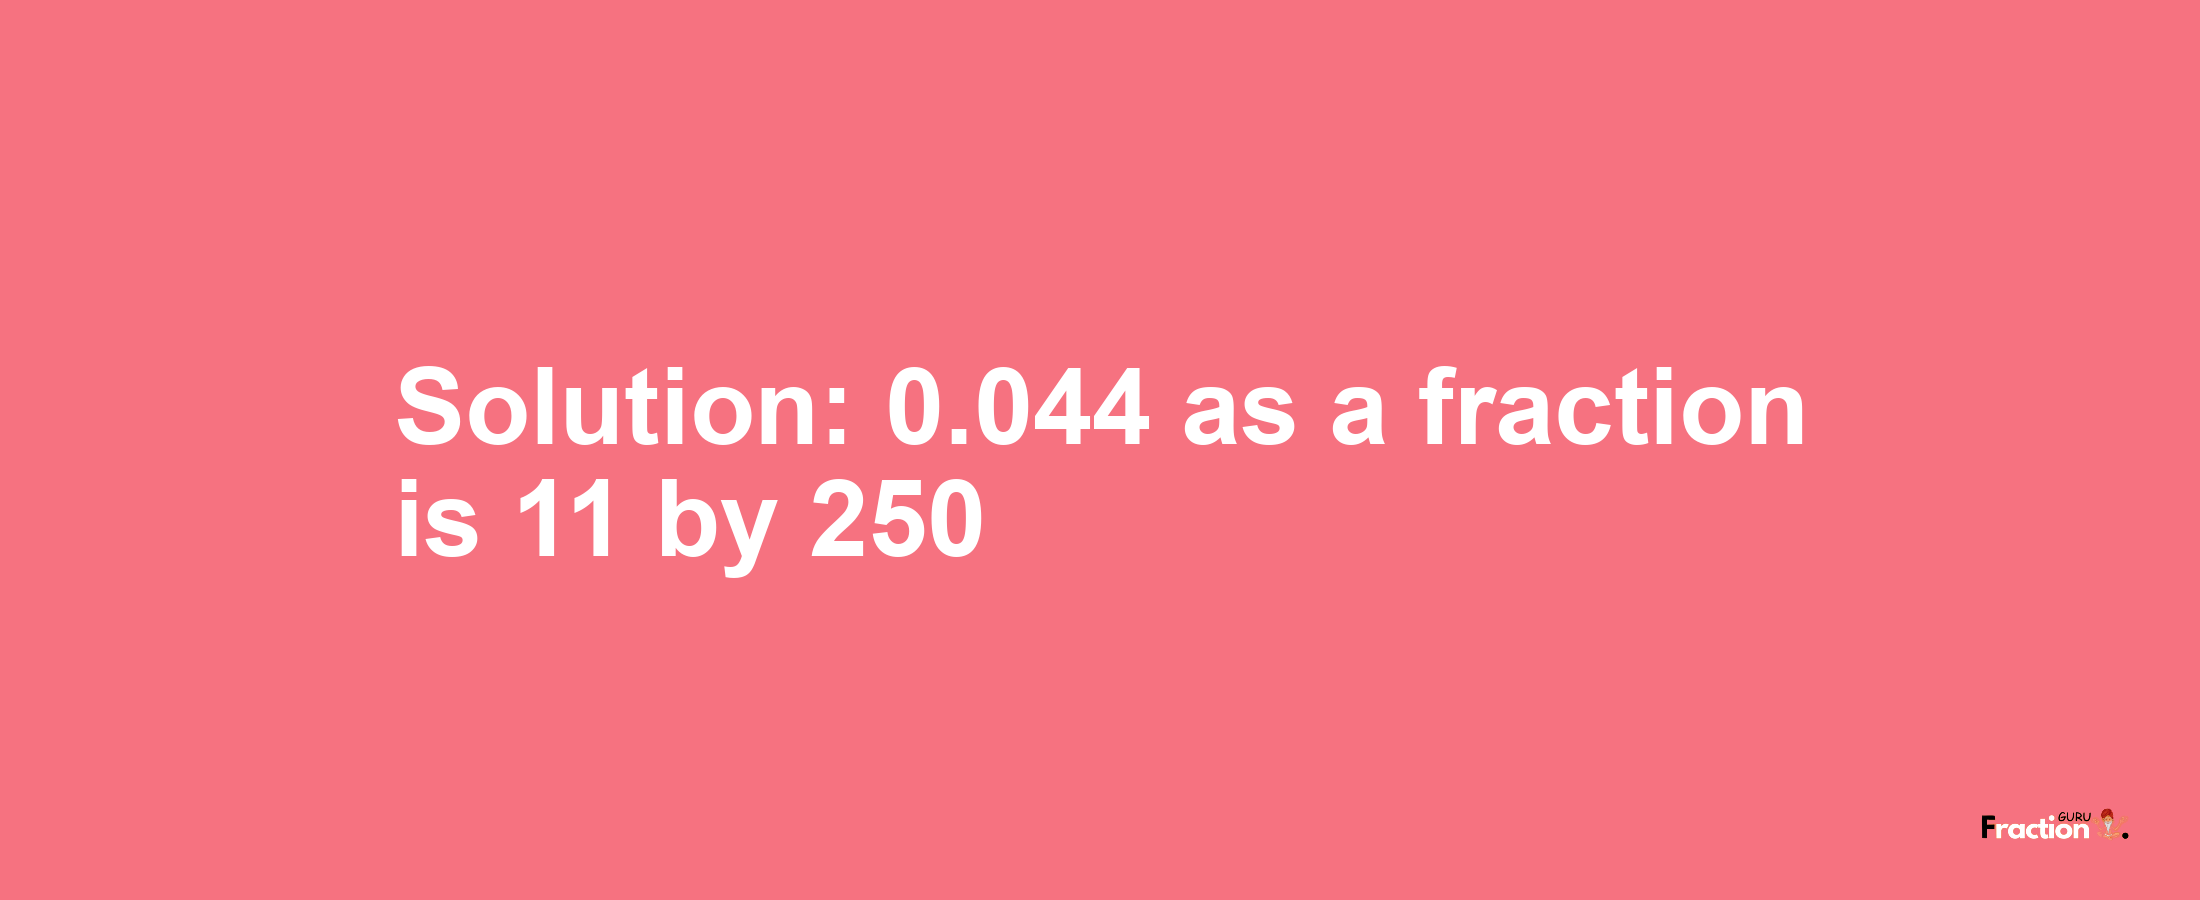 Solution:0.044 as a fraction is 11/250